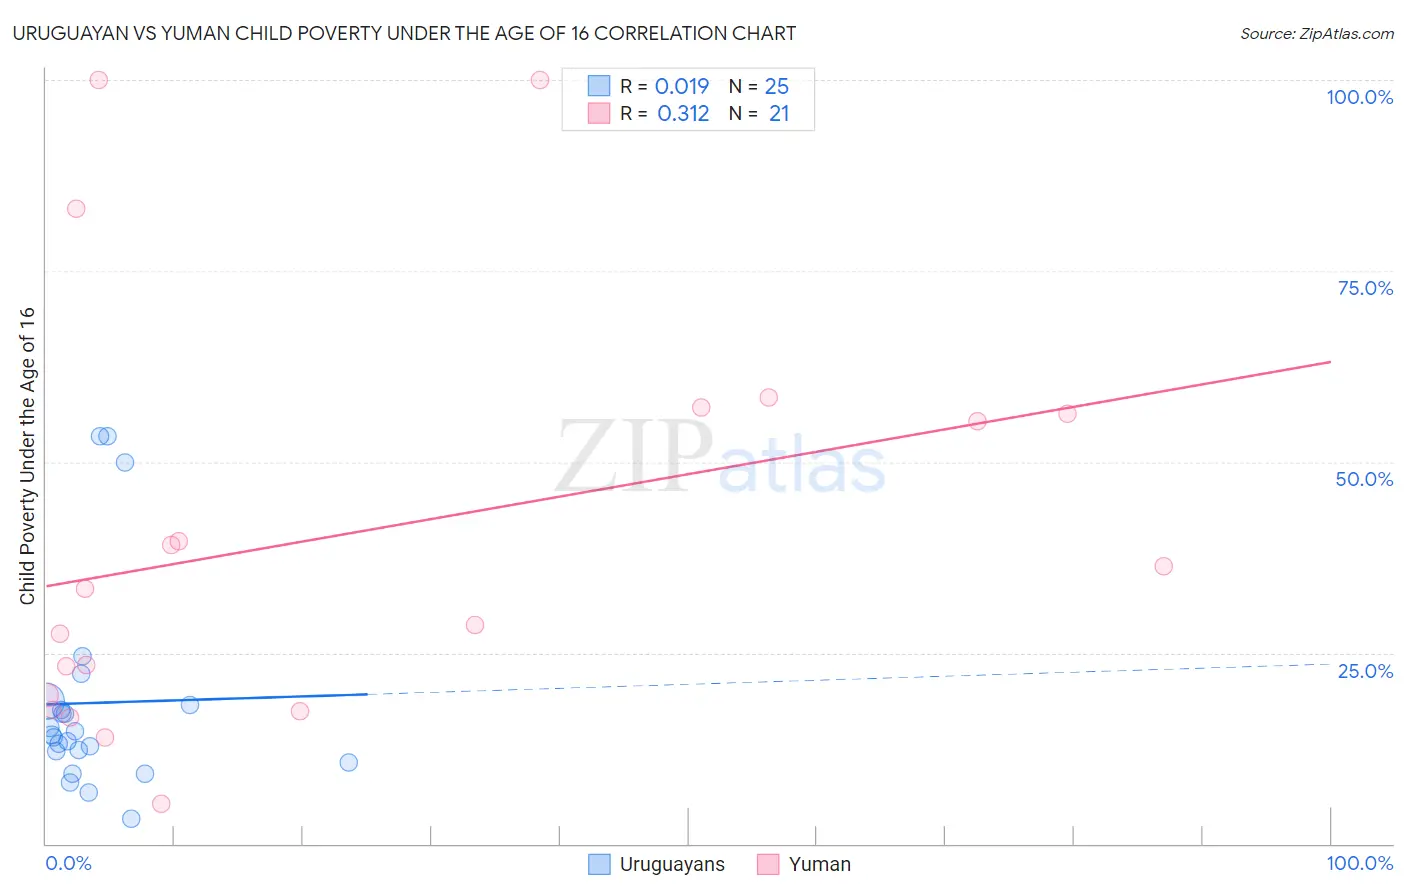 Uruguayan vs Yuman Child Poverty Under the Age of 16